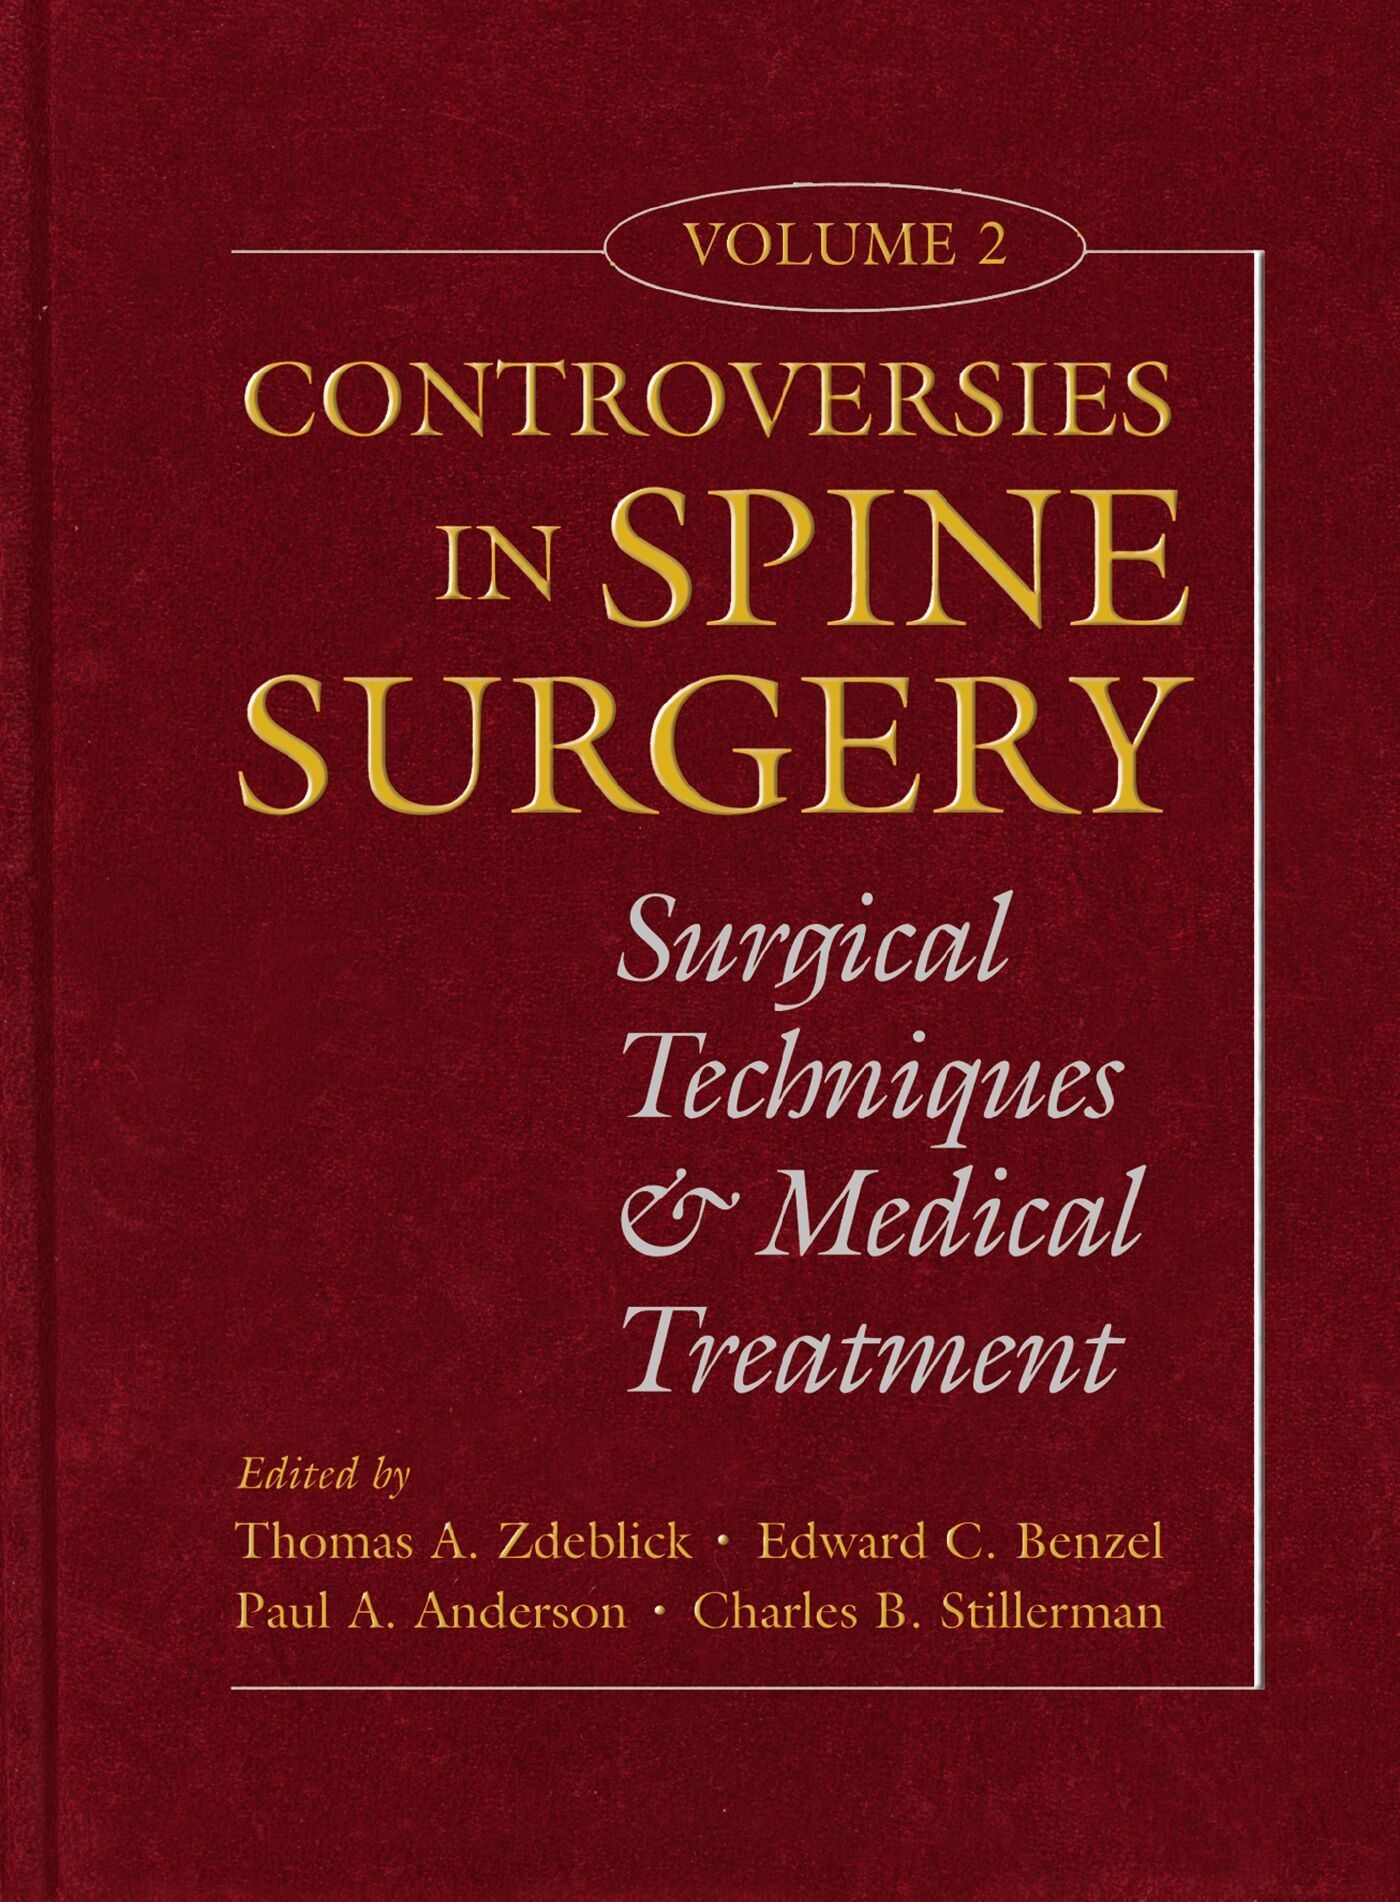 Controversies in Spine Surgery, Volume 2, 9781626236004